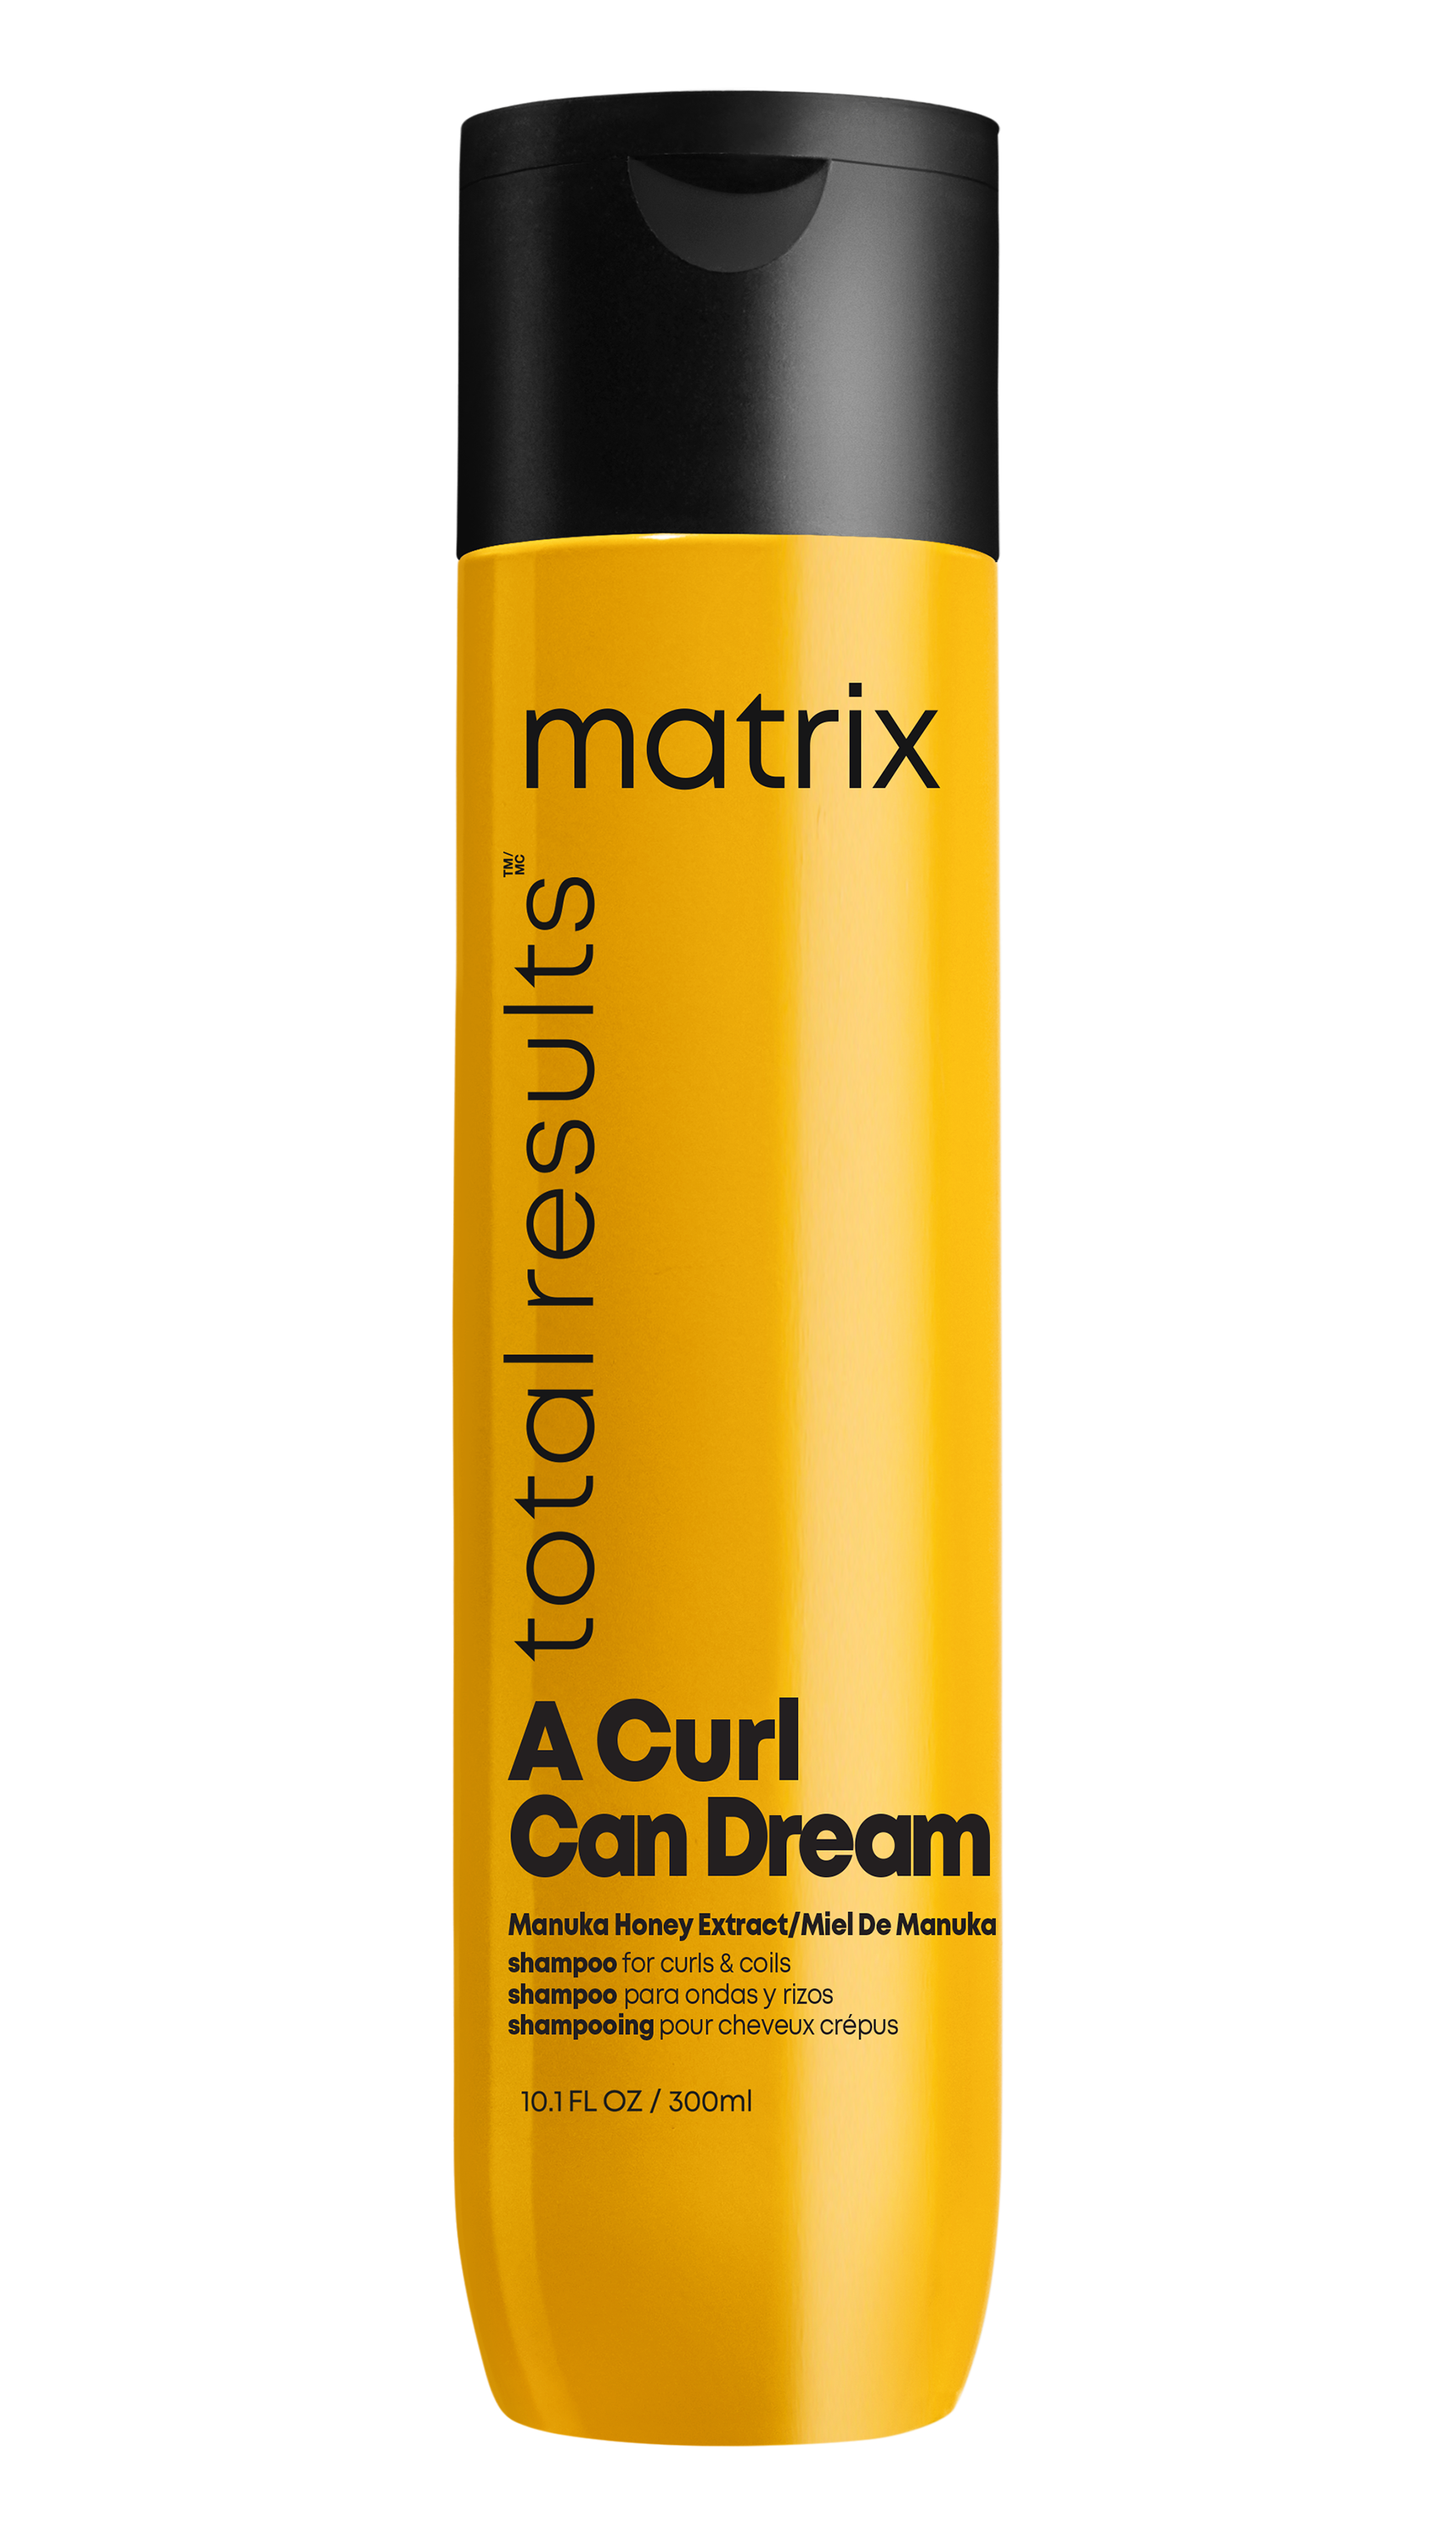 A Curl Can Dream Manuka Honey Extract Shampoo for curls & coils 13,60*€ - 300ml